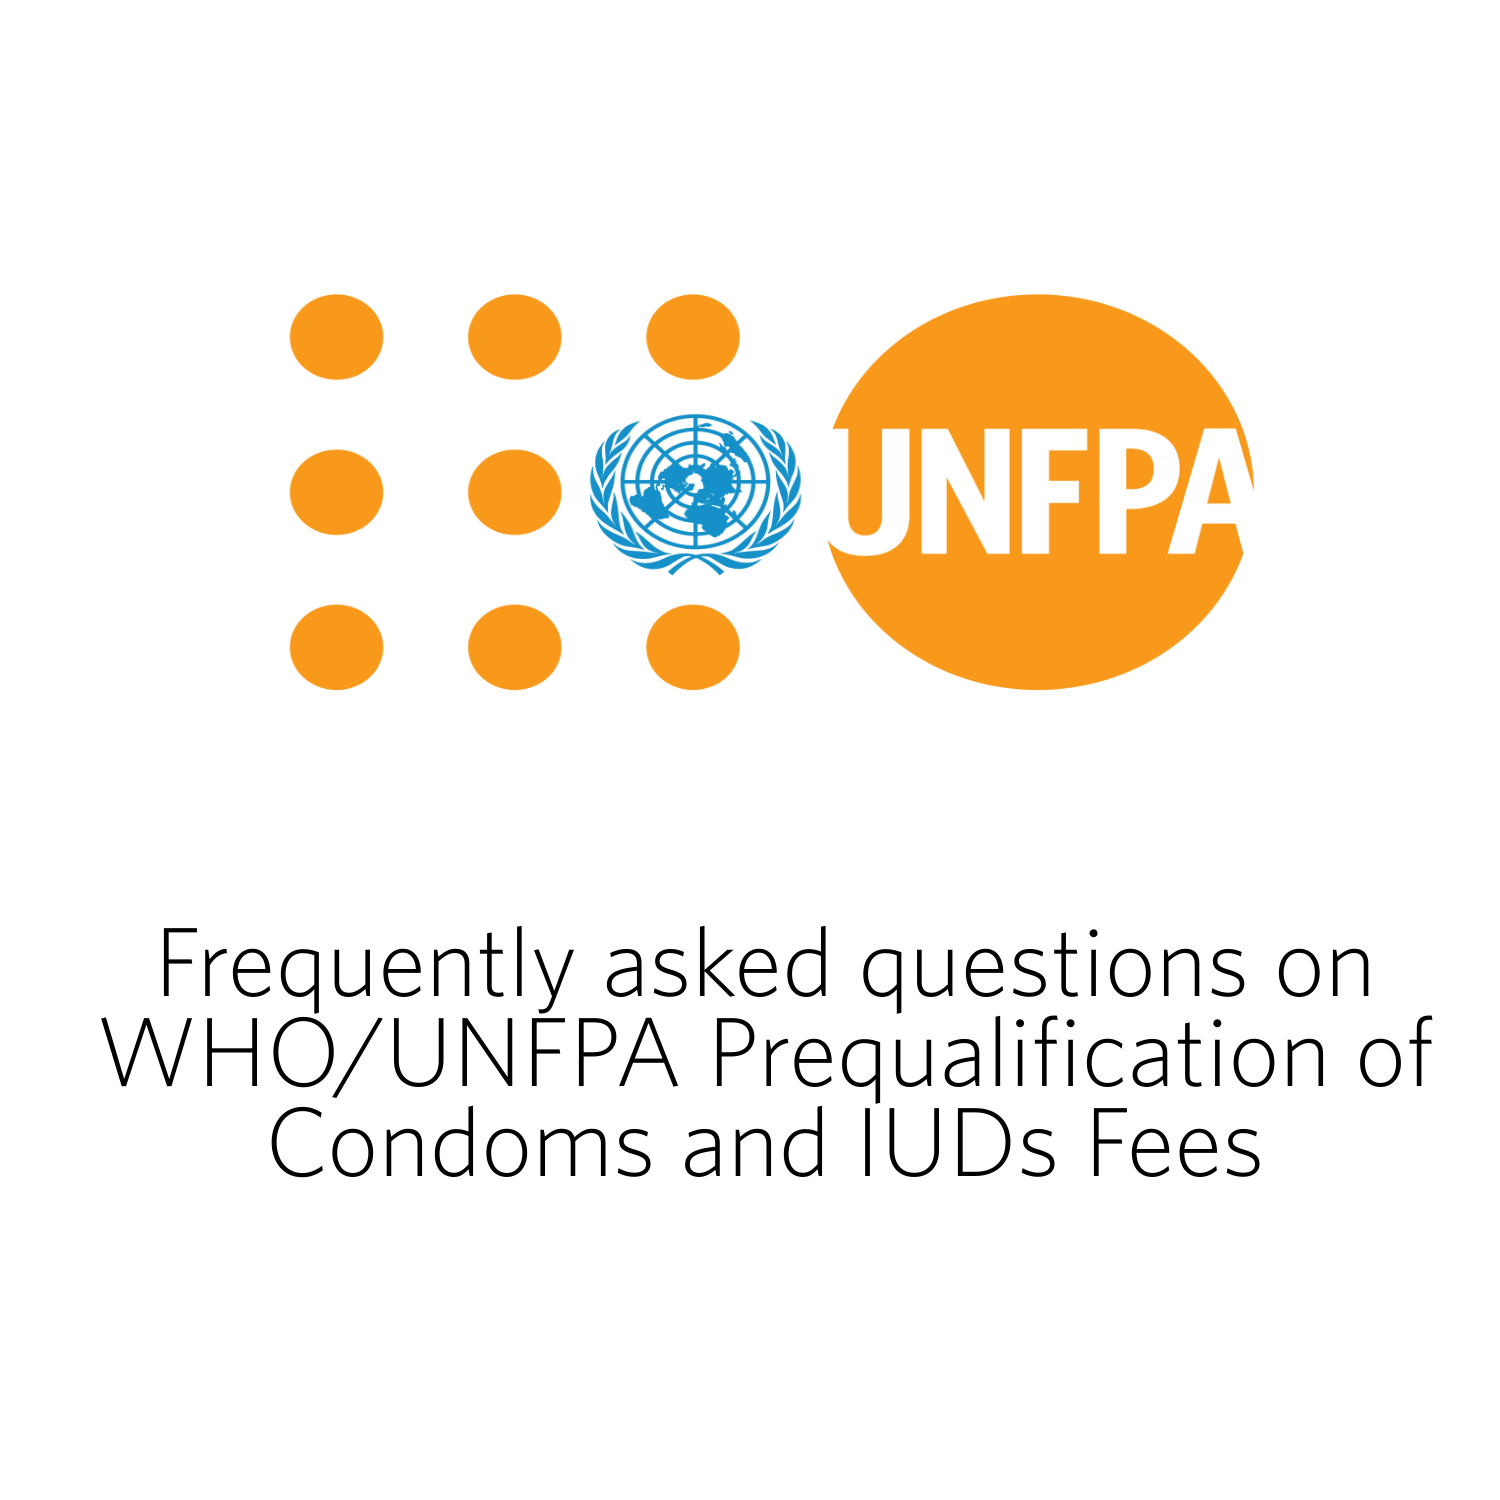 Frequently asked questions on WHO/UNFPA Prequalification of Condoms and IUDs Fees